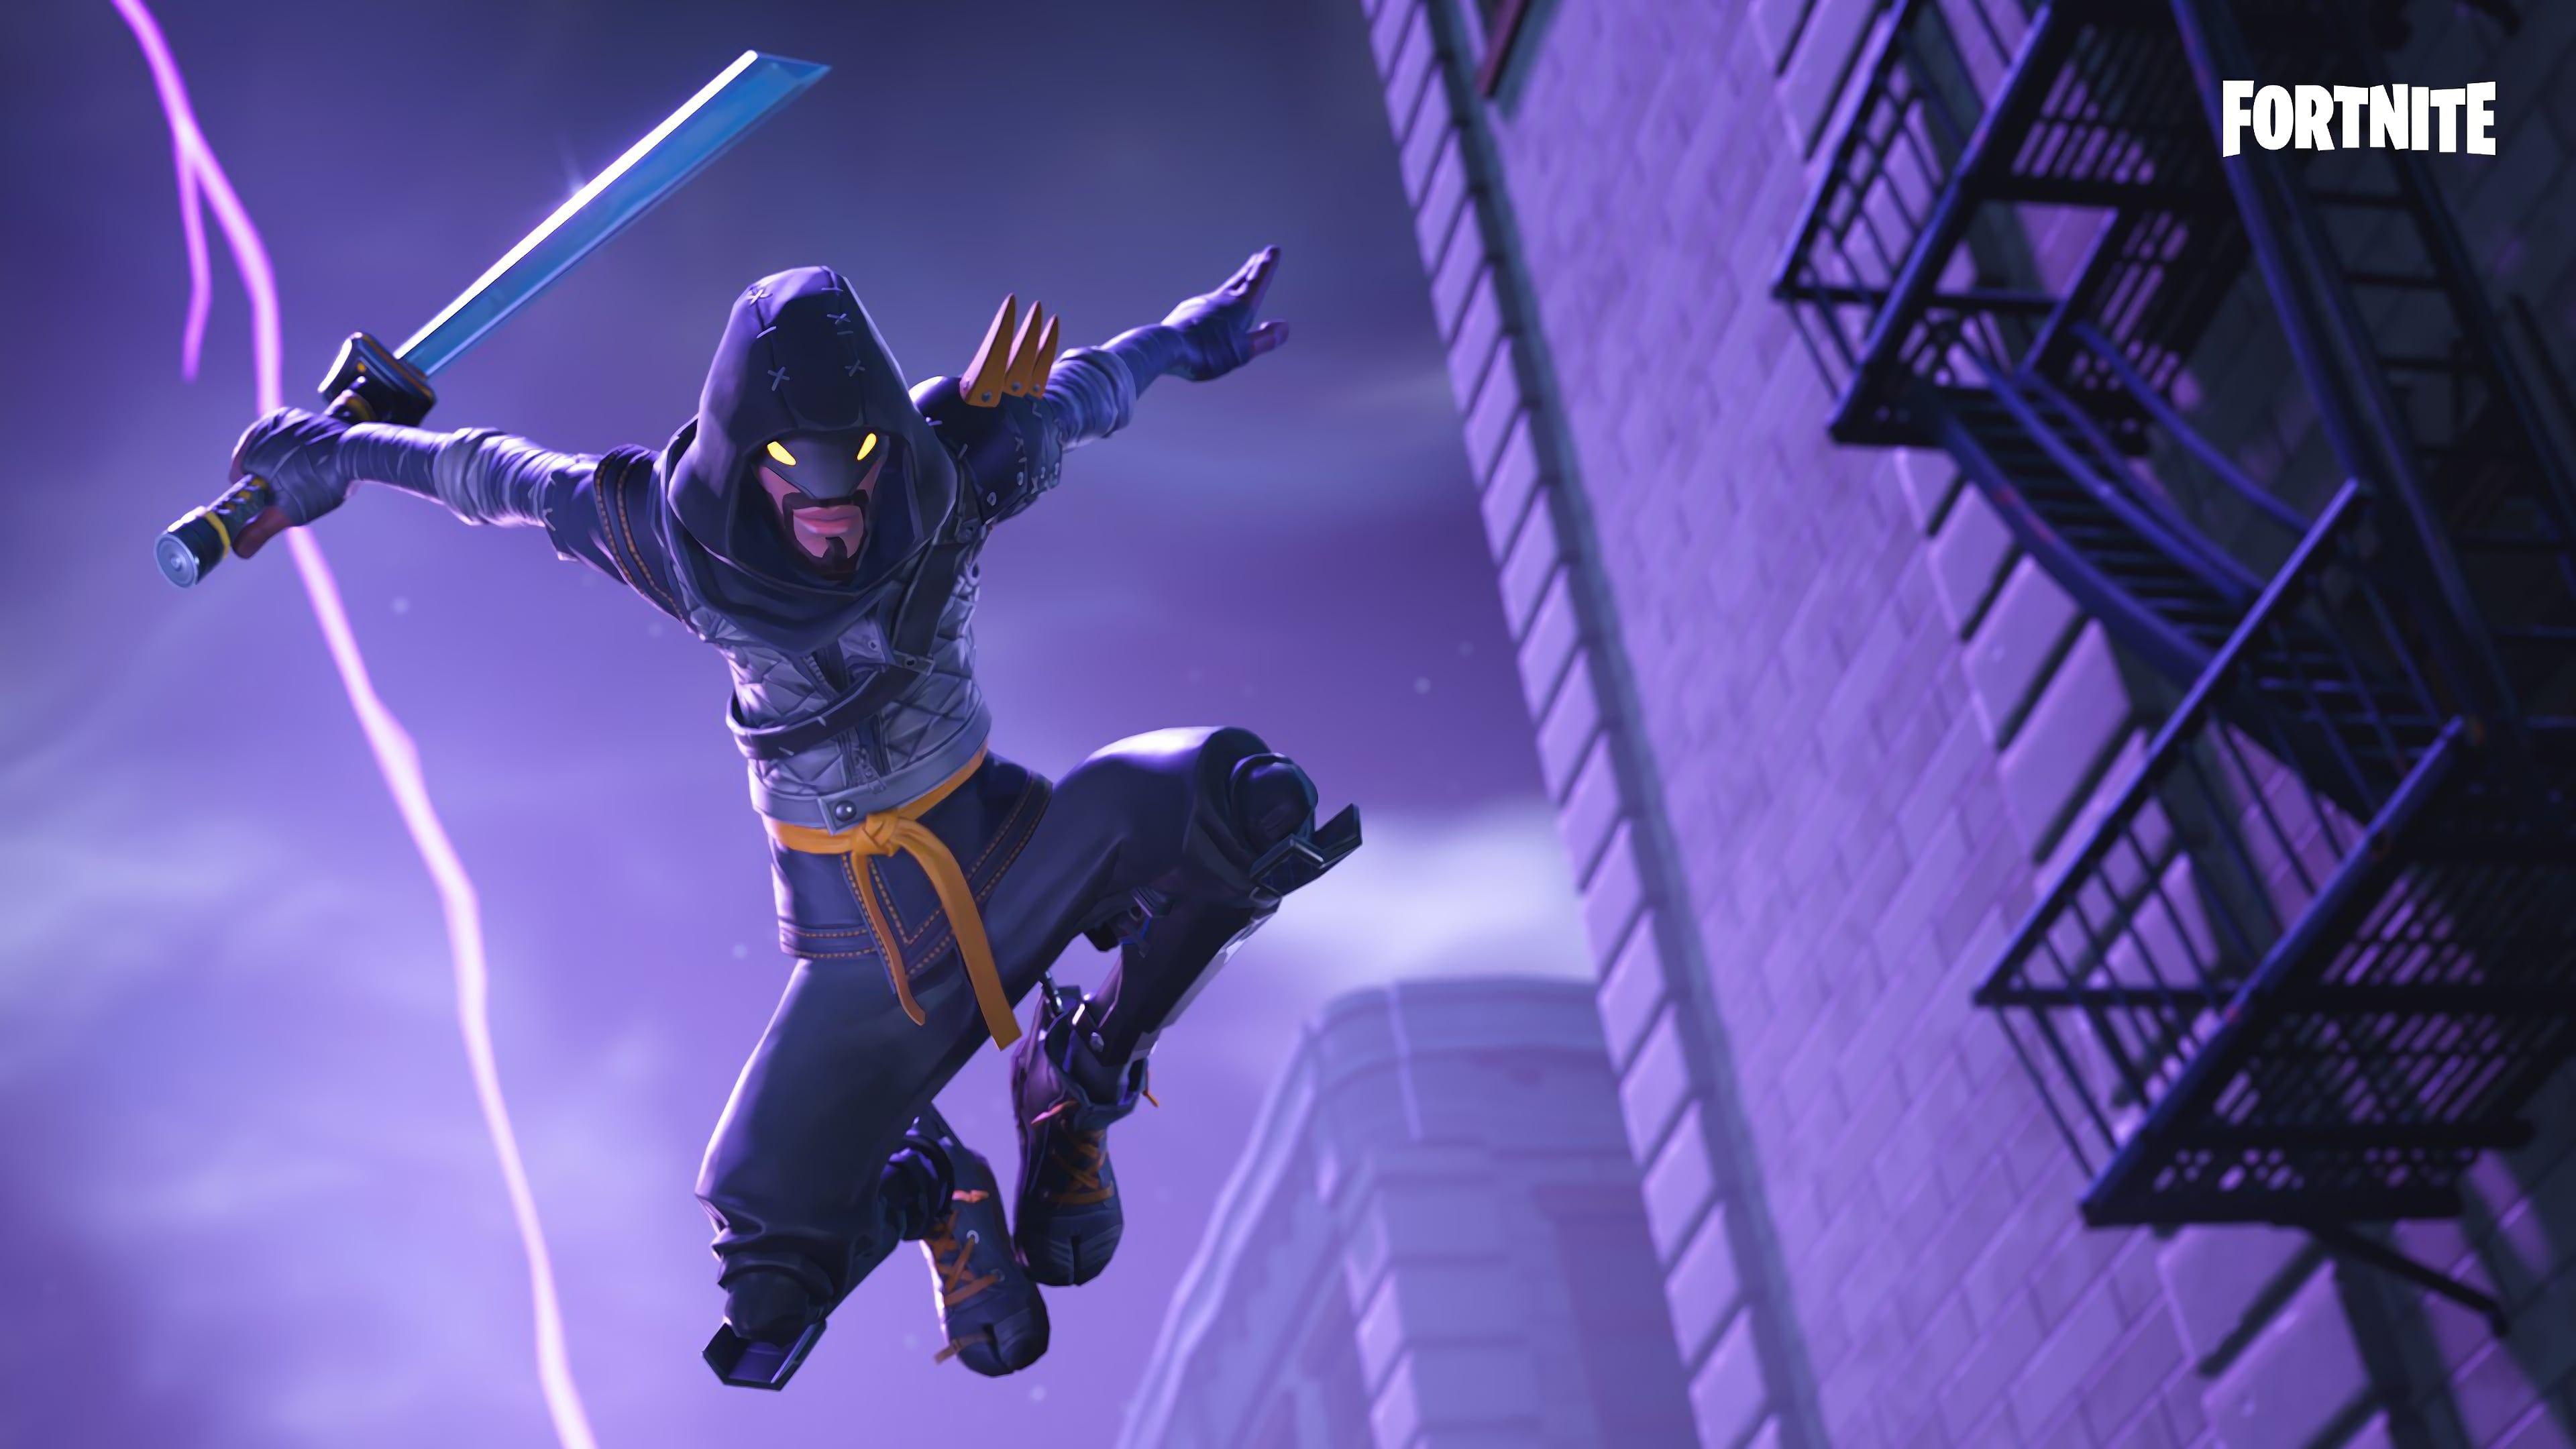 PC 4K Fortnite Background Mythic Cloaked Star Ninja, Free 4K Fortnite Background Mythic Cloaked Star Ninja Wallpaper. Fortnite Wallpaper